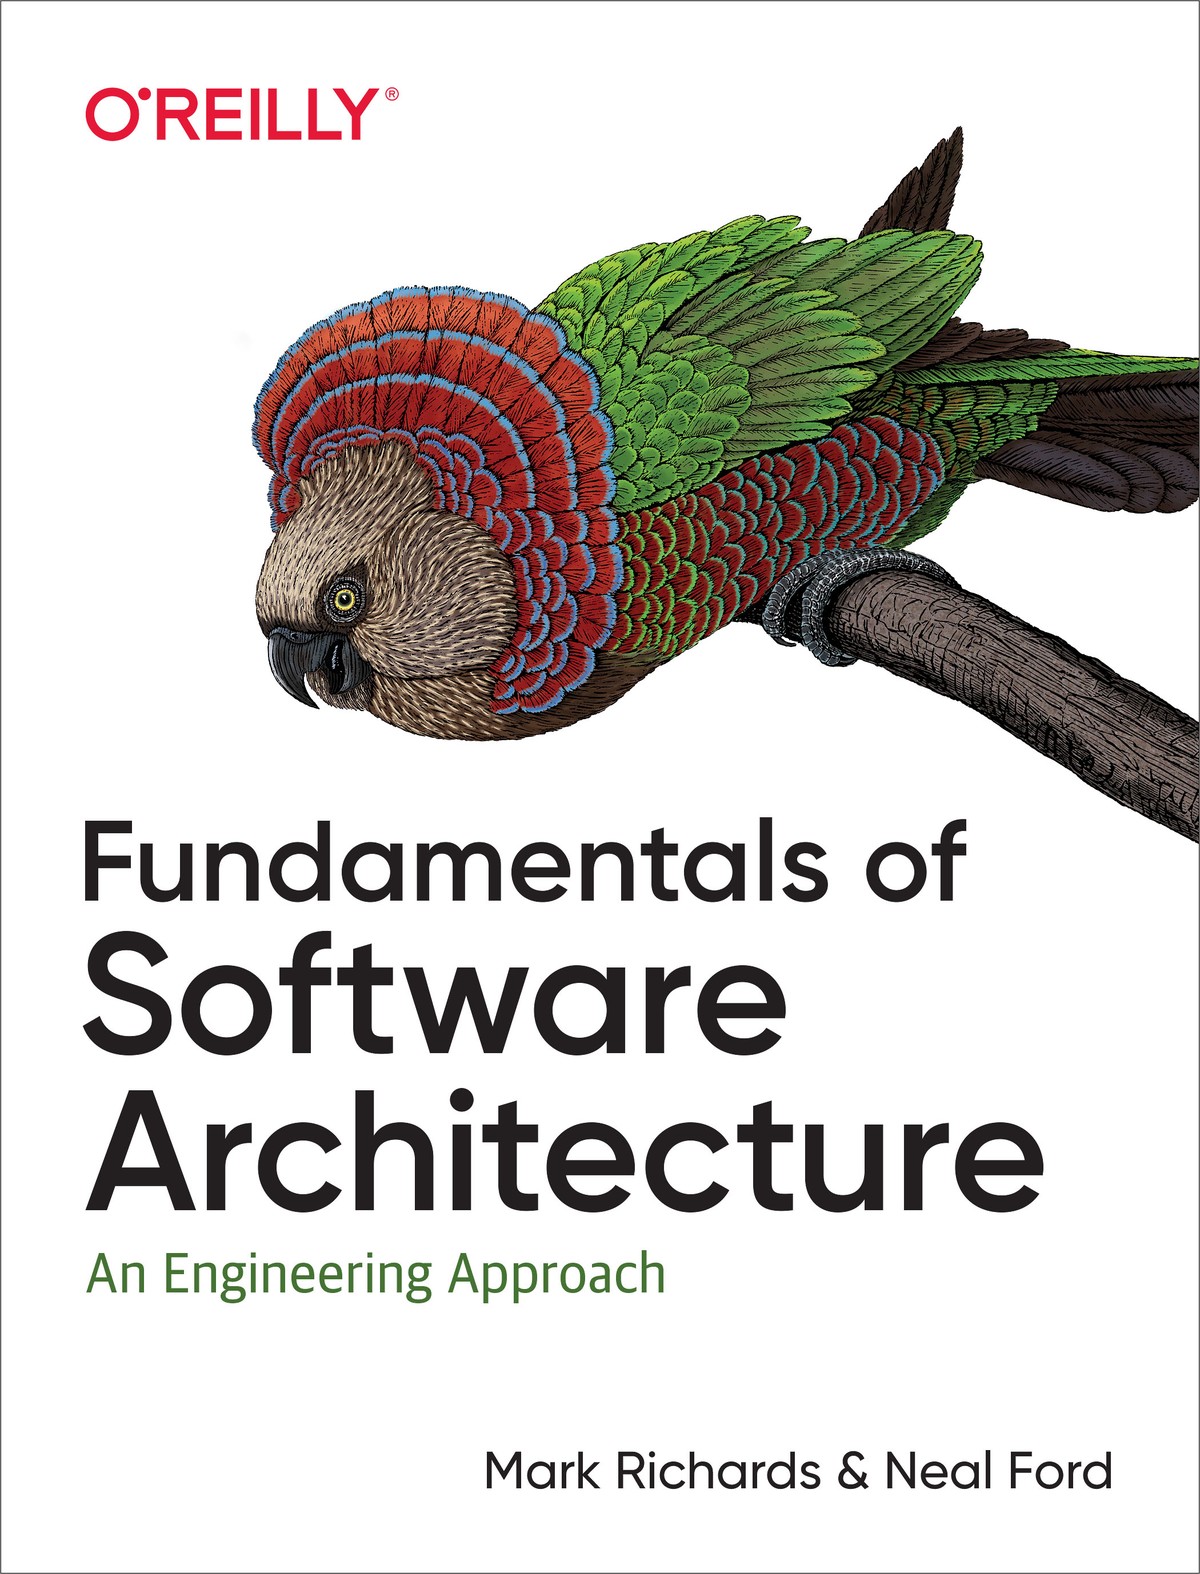 Neal Ford, Mark Richards: Fundamentals of Software Architecture (Paperback, 2020, O'Reilly Media)